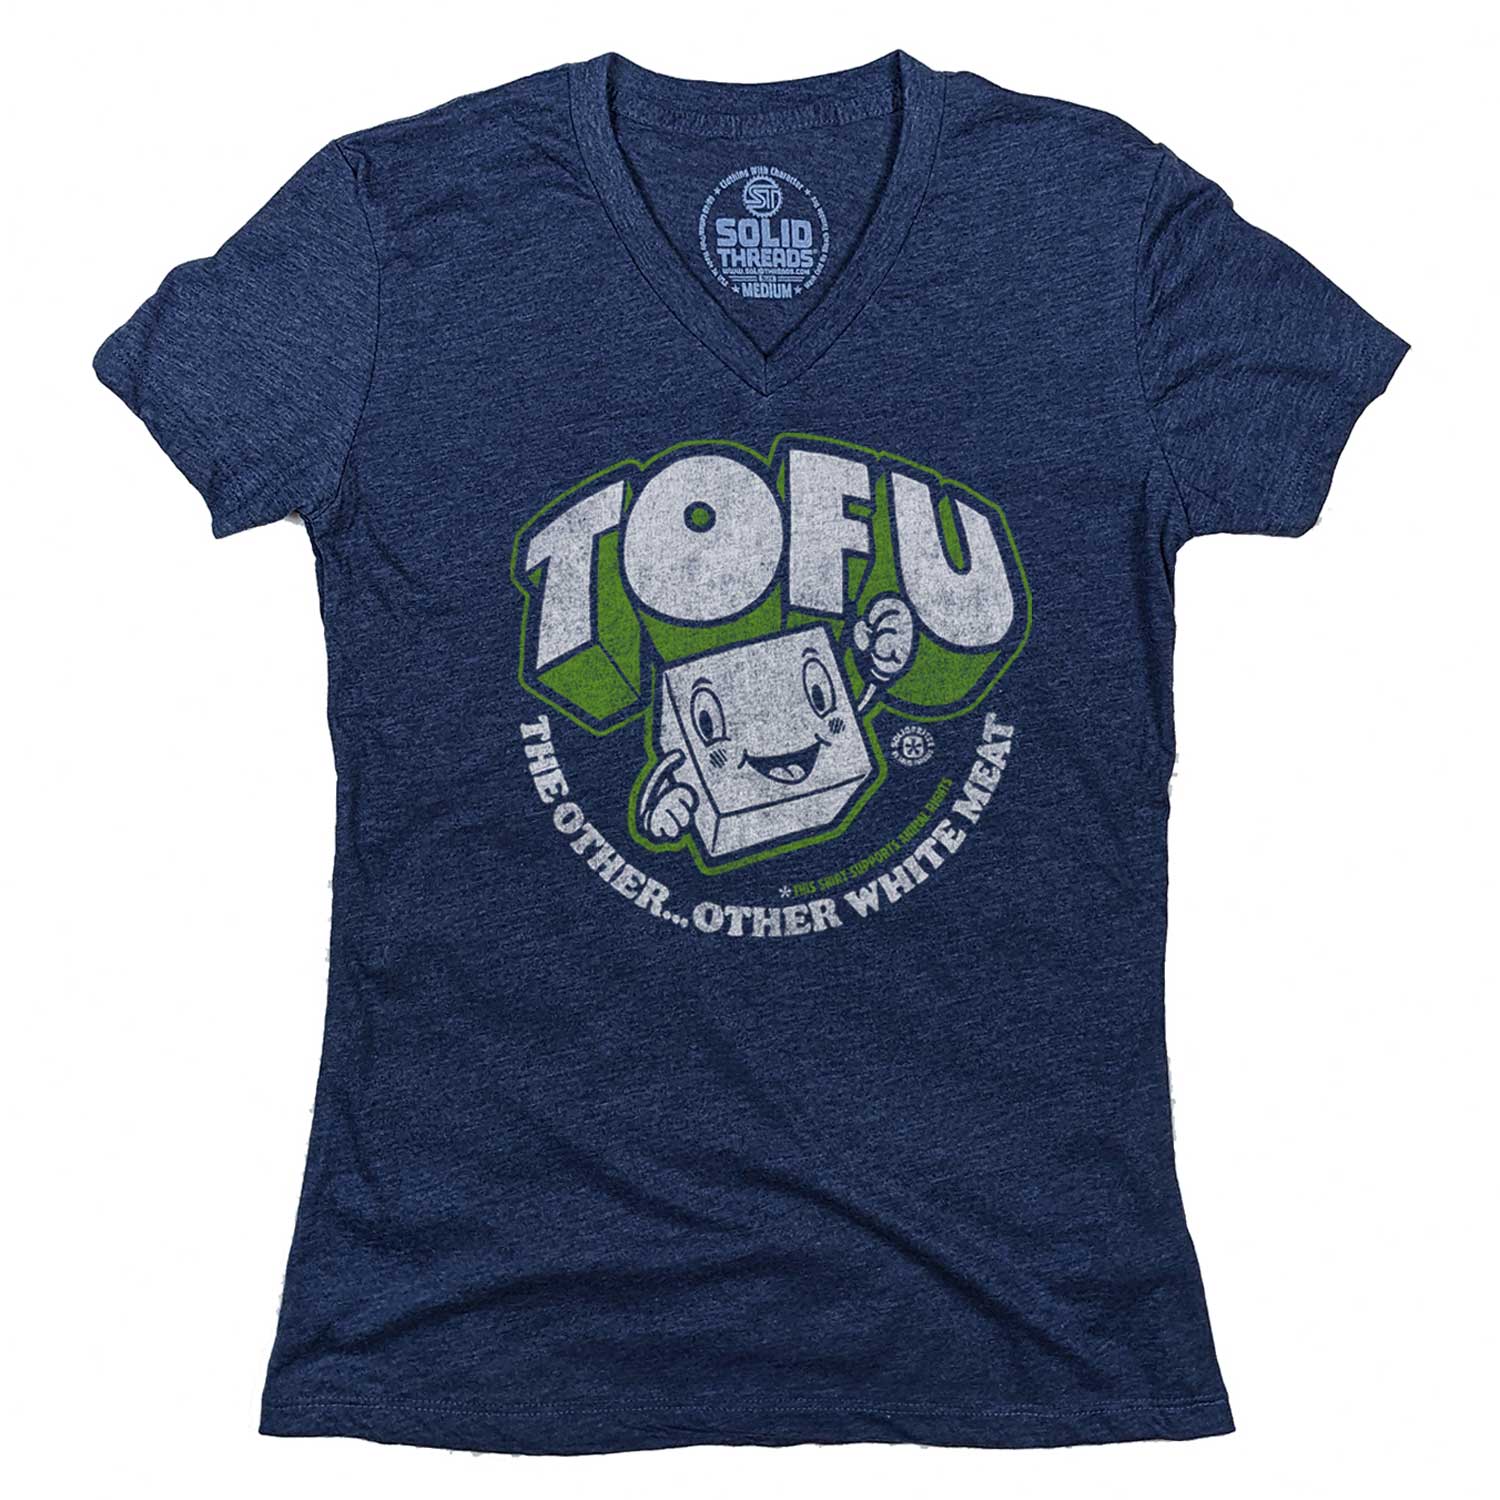 Women's Tofu, The Other Other White Meat Vintage Graphic V-Neck Tee | Vegan T-shirt | Solid Threads